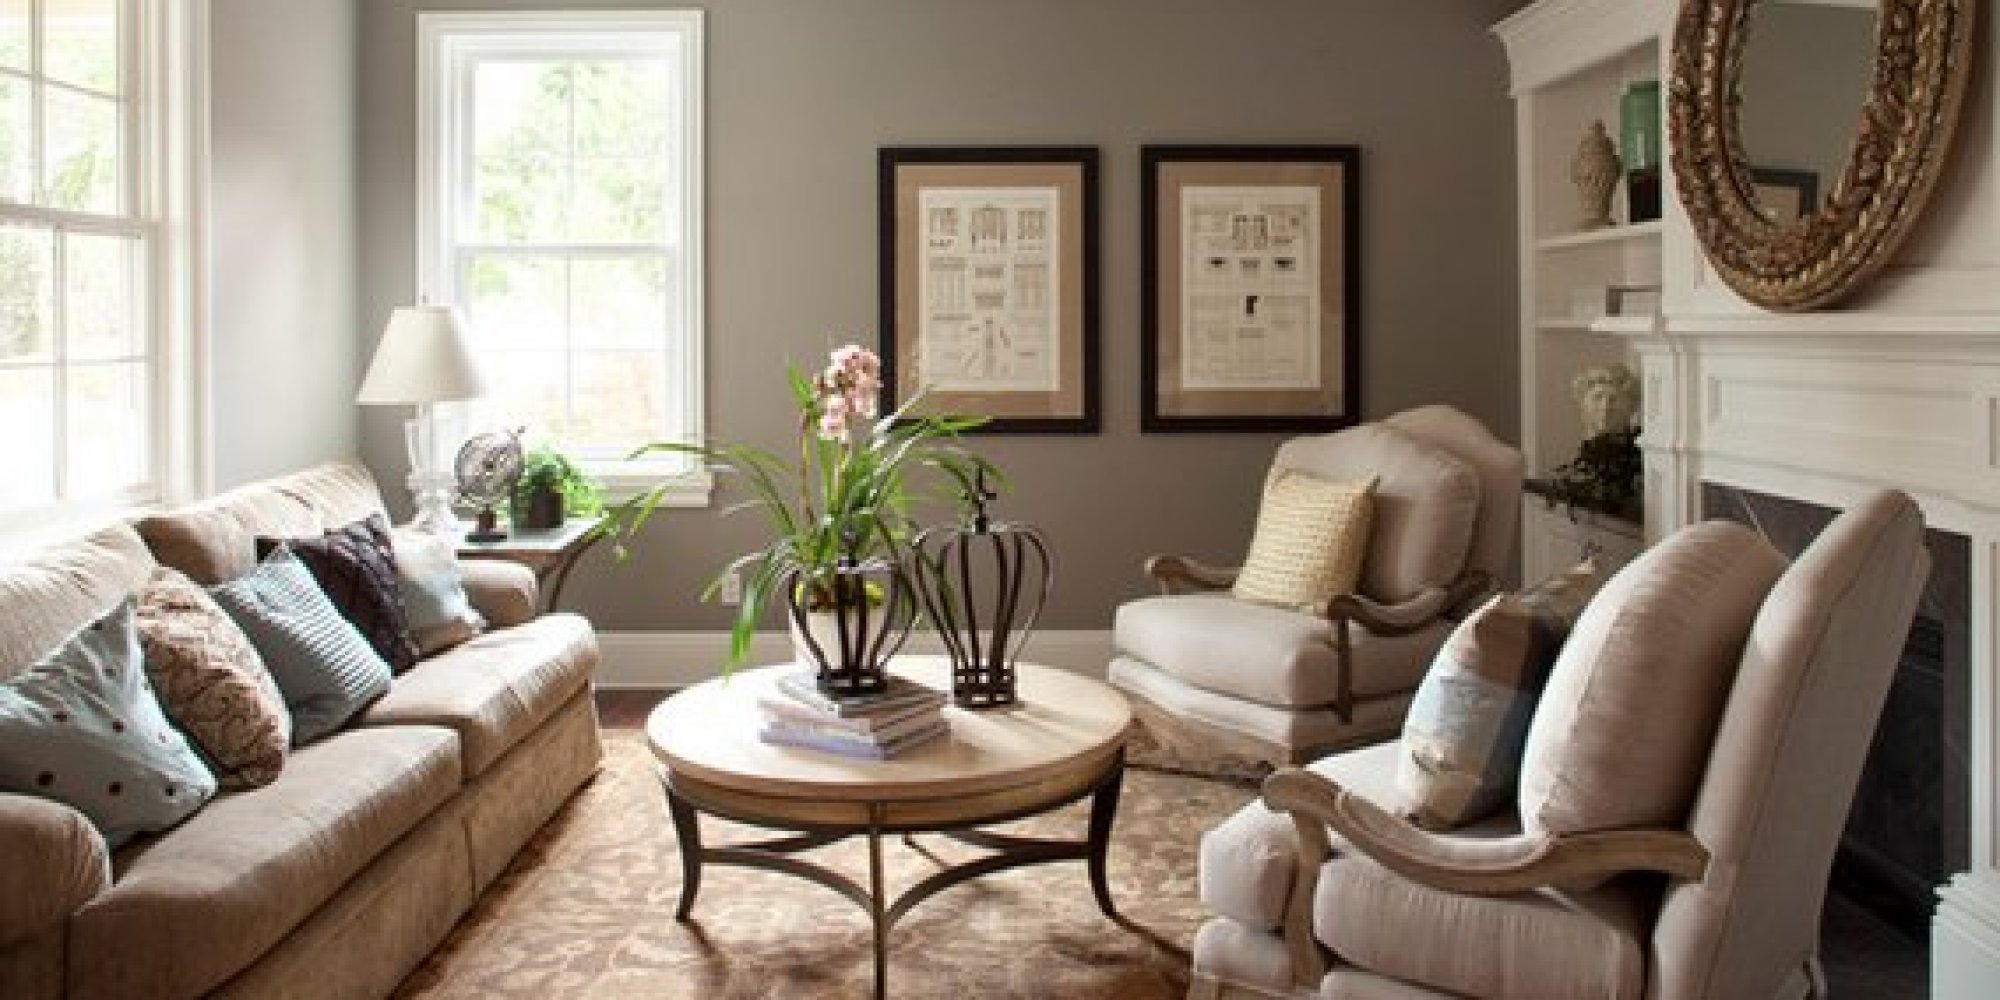 The 6 Best Paint Colors That Work In Any Home | HuffPost